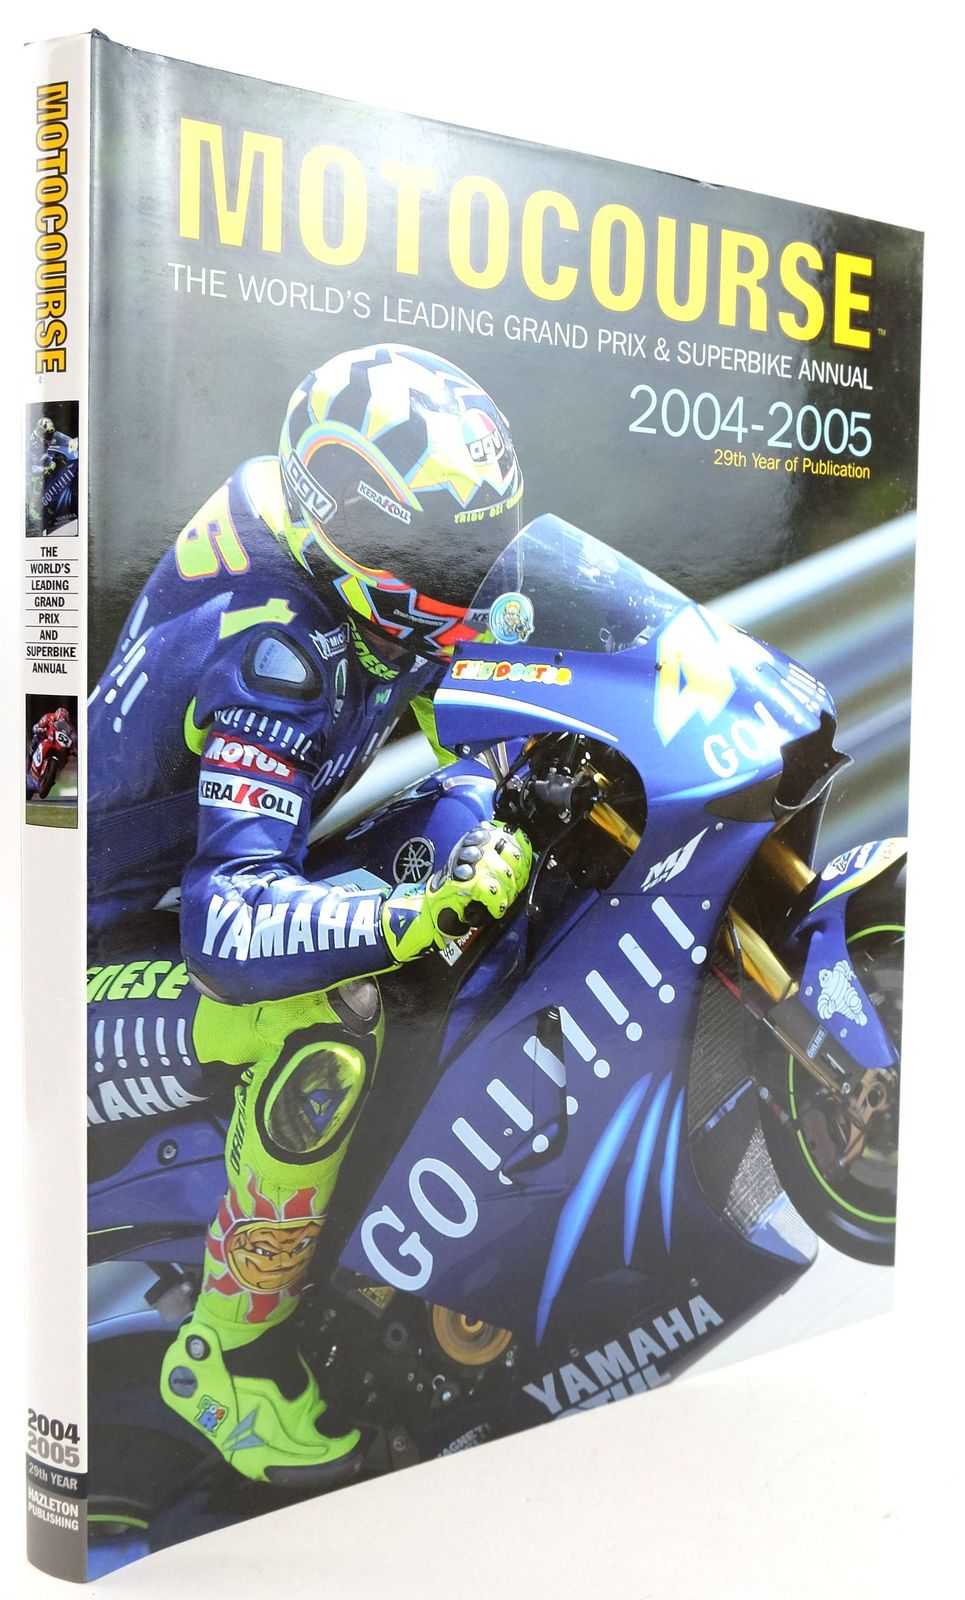 Photo of MOTOCOURSE 2004-2005 published by Hazleton Publishing (STOCK CODE: 1819878)  for sale by Stella & Rose's Books